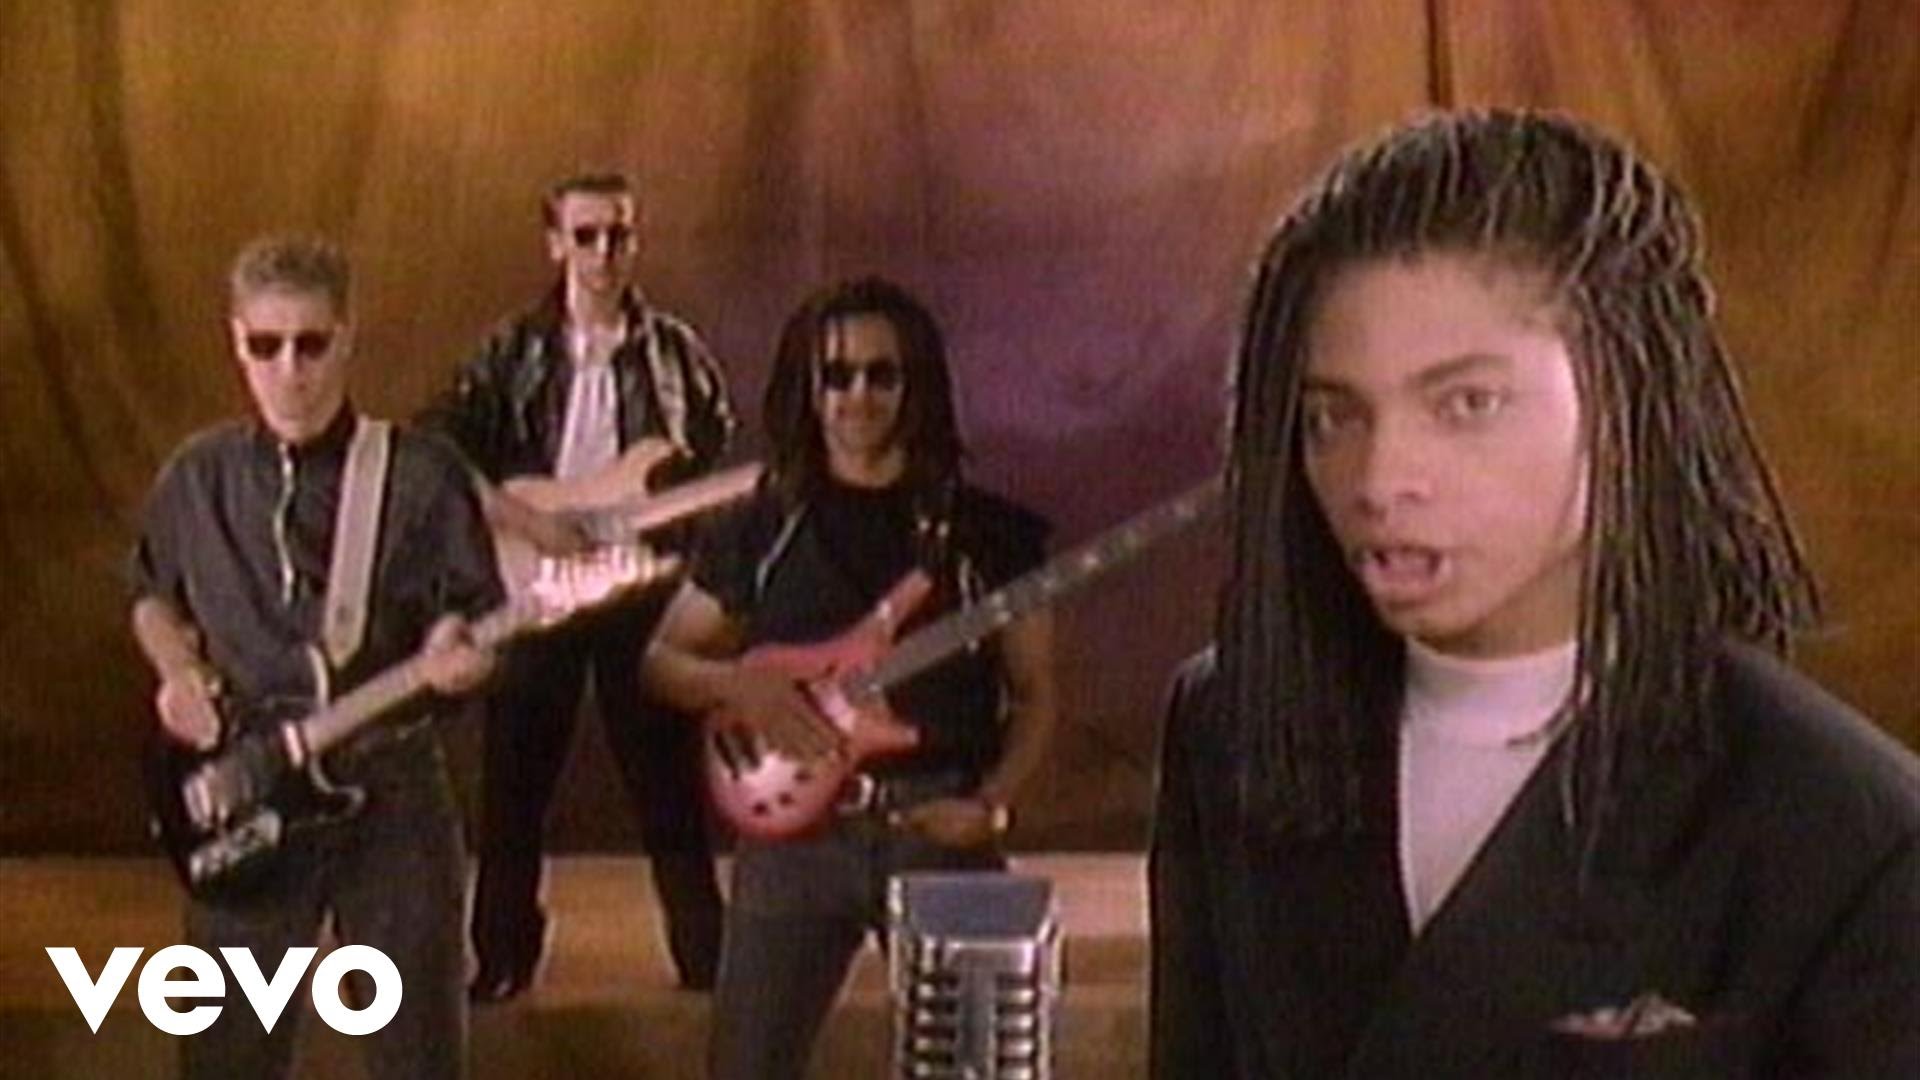 Terence Trent DArby - Wishing Well